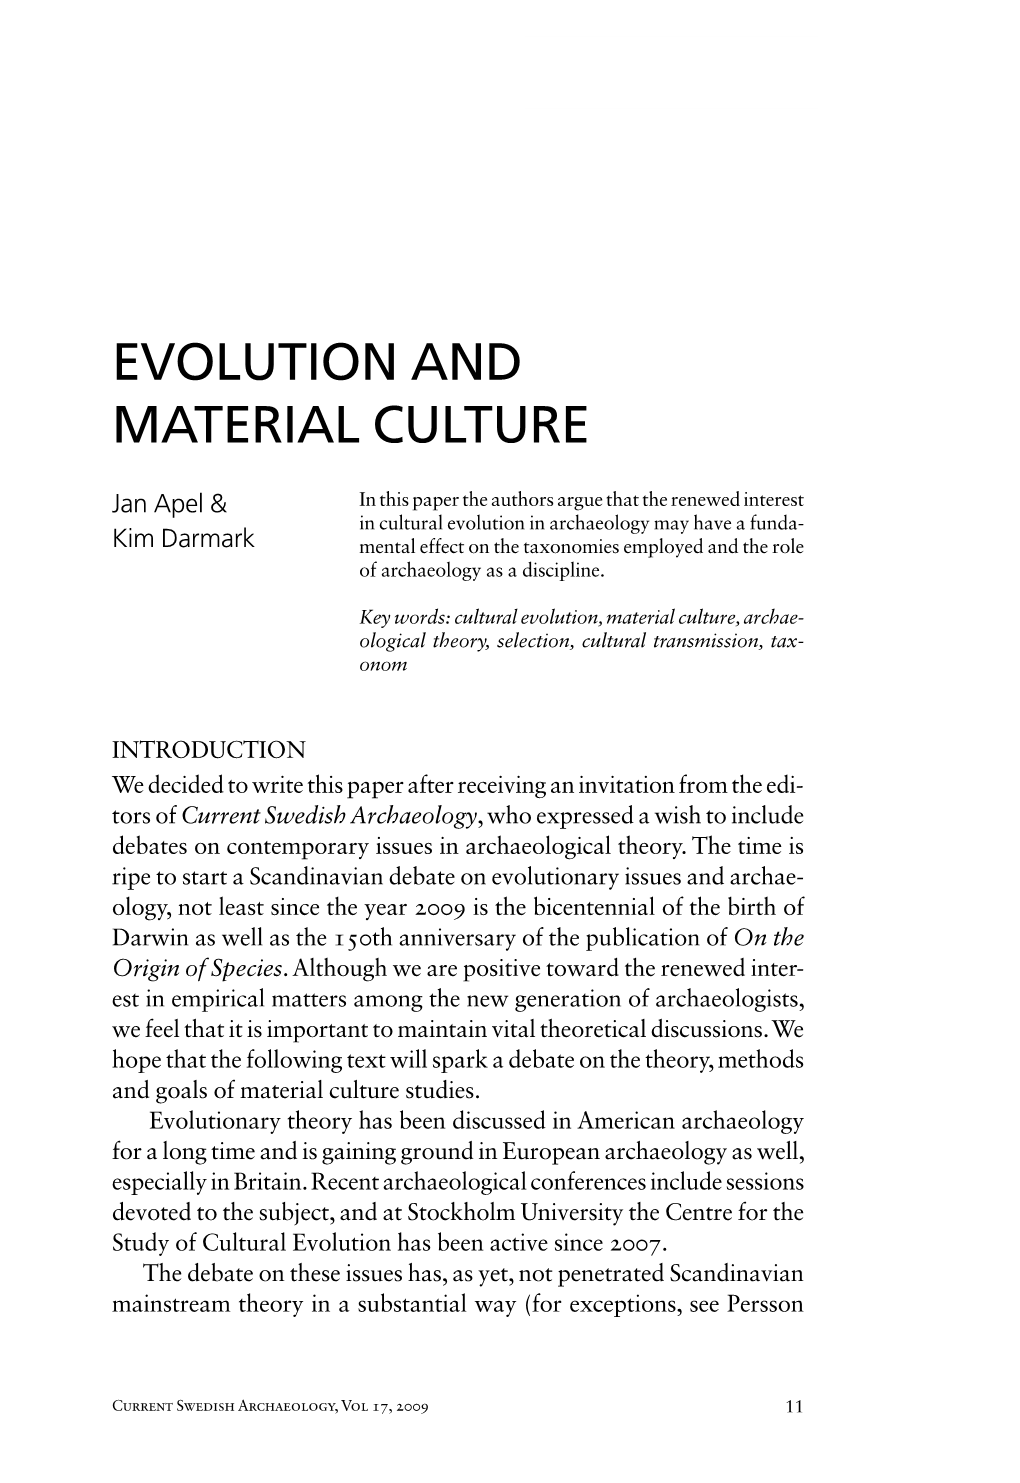 Evolution and Material Culture